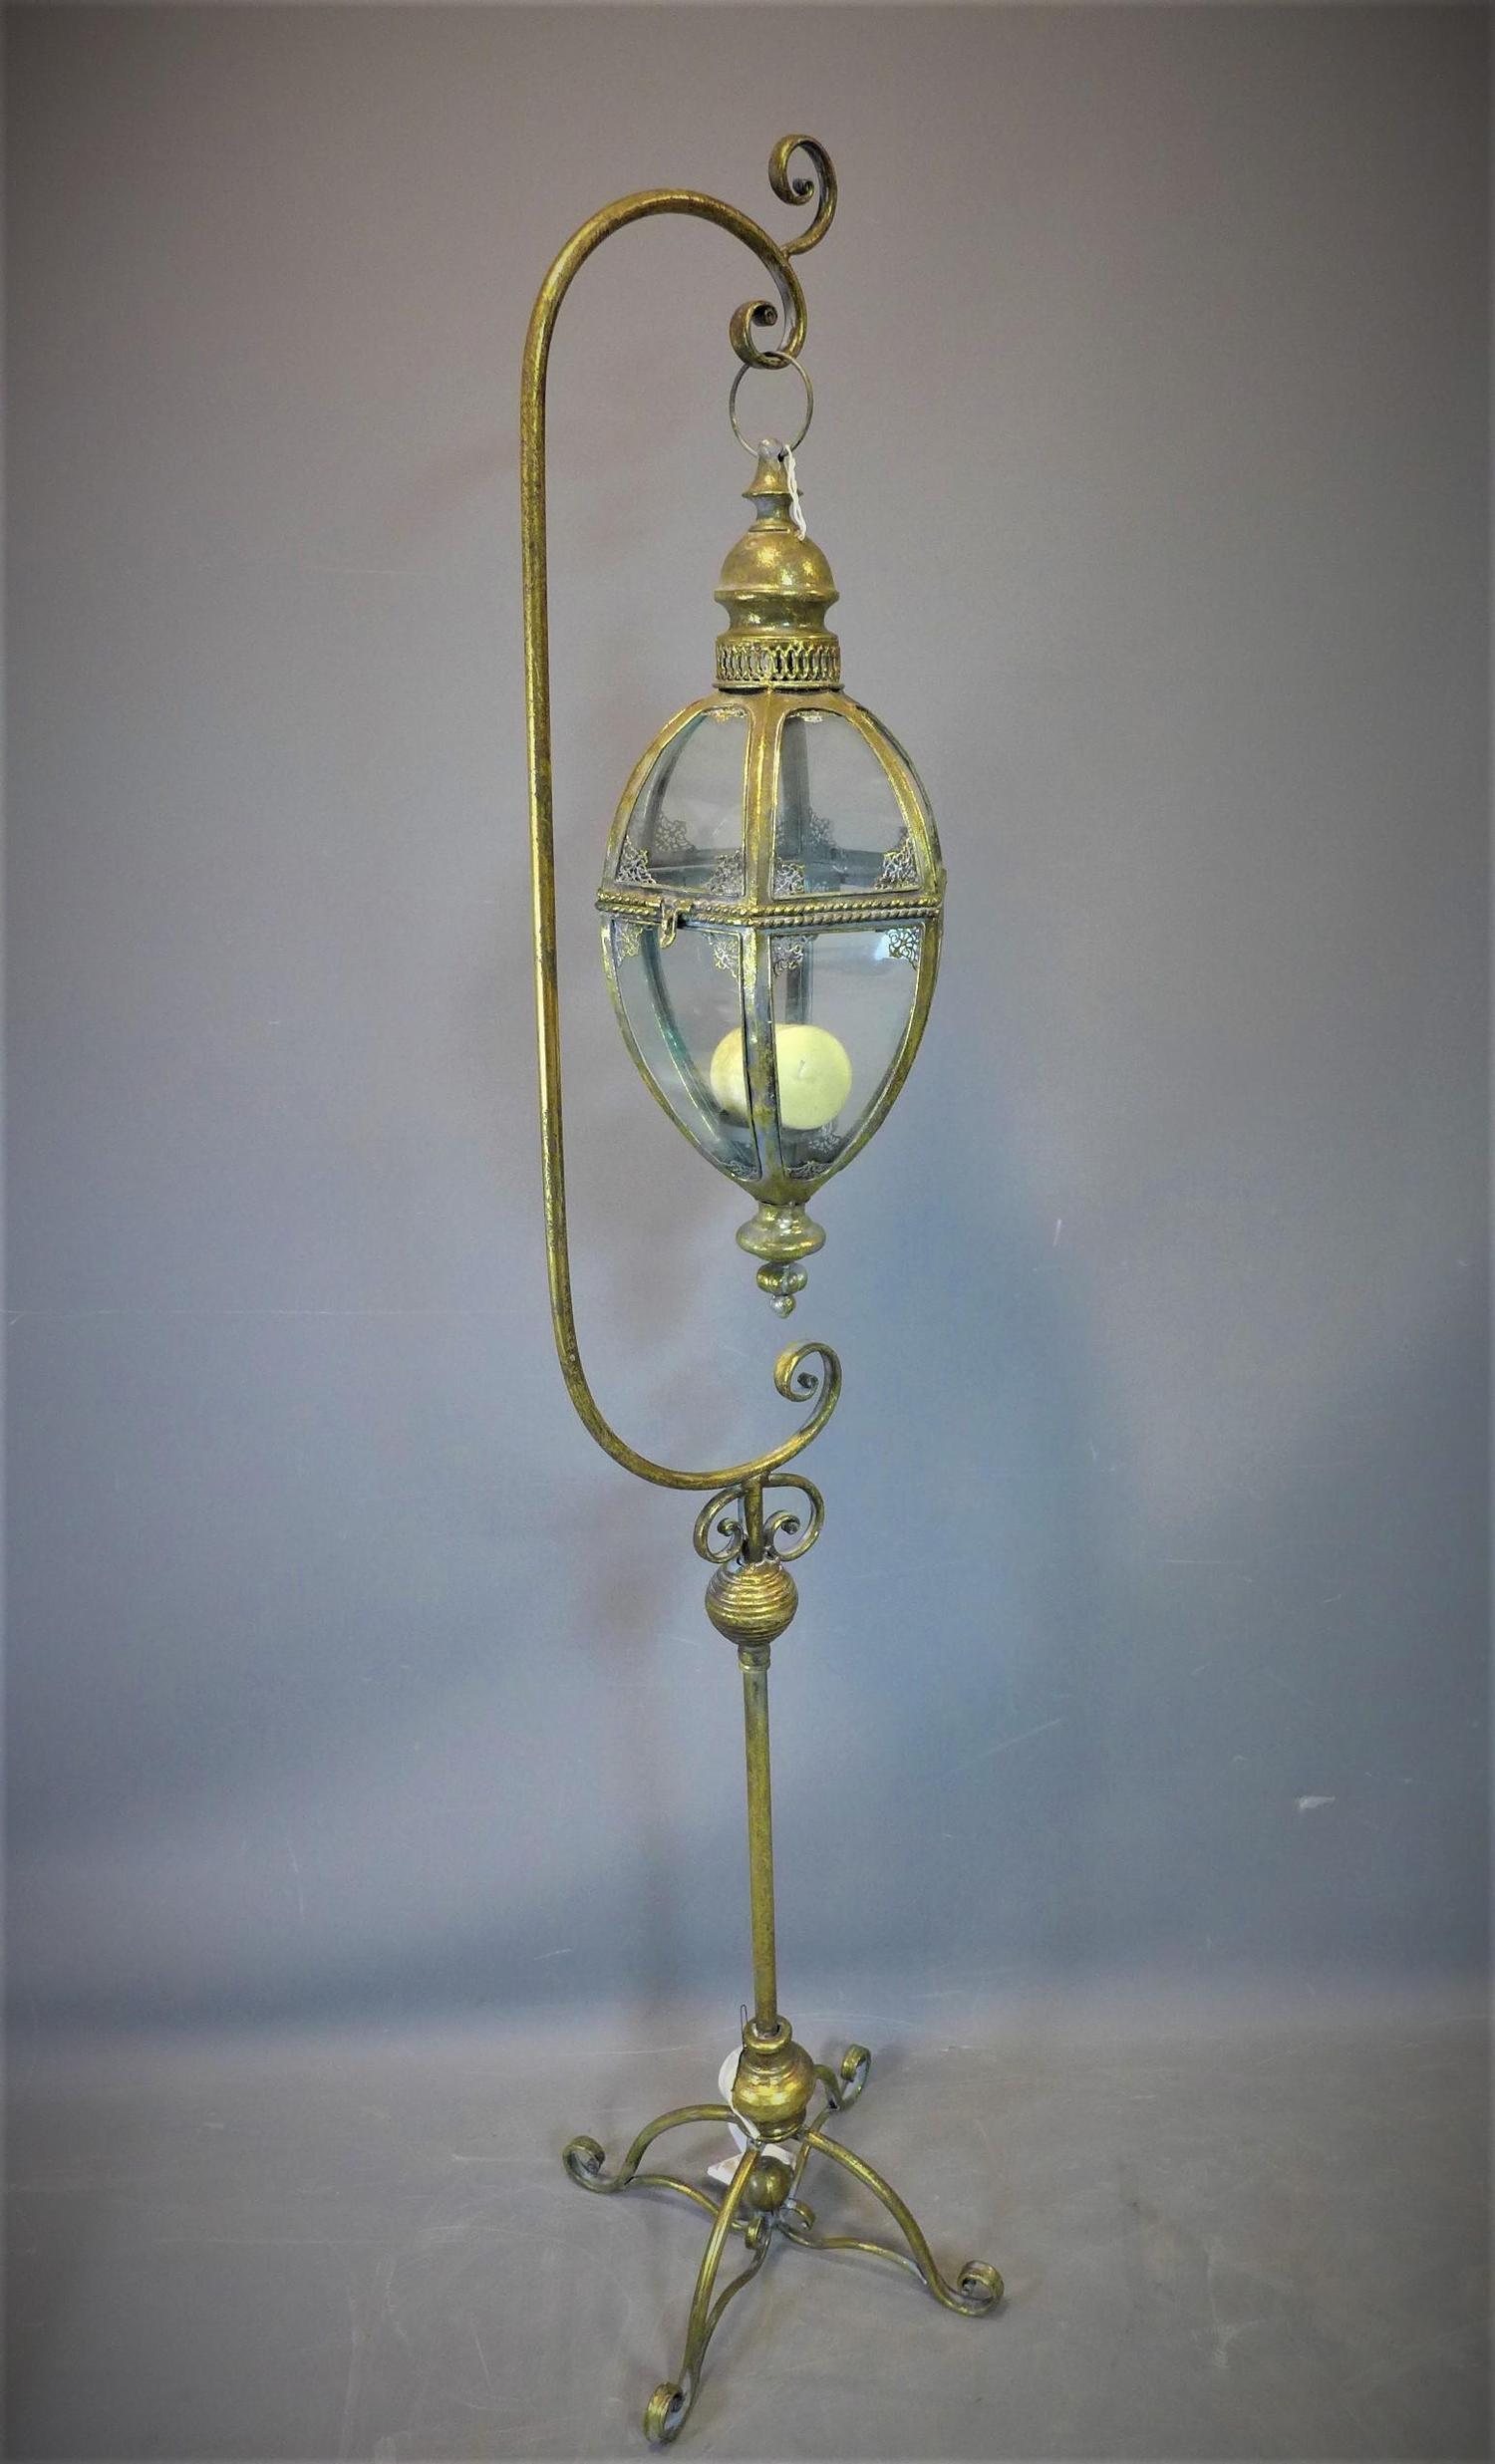 Bowl Candleholders with stand, brass and glass, 20th century